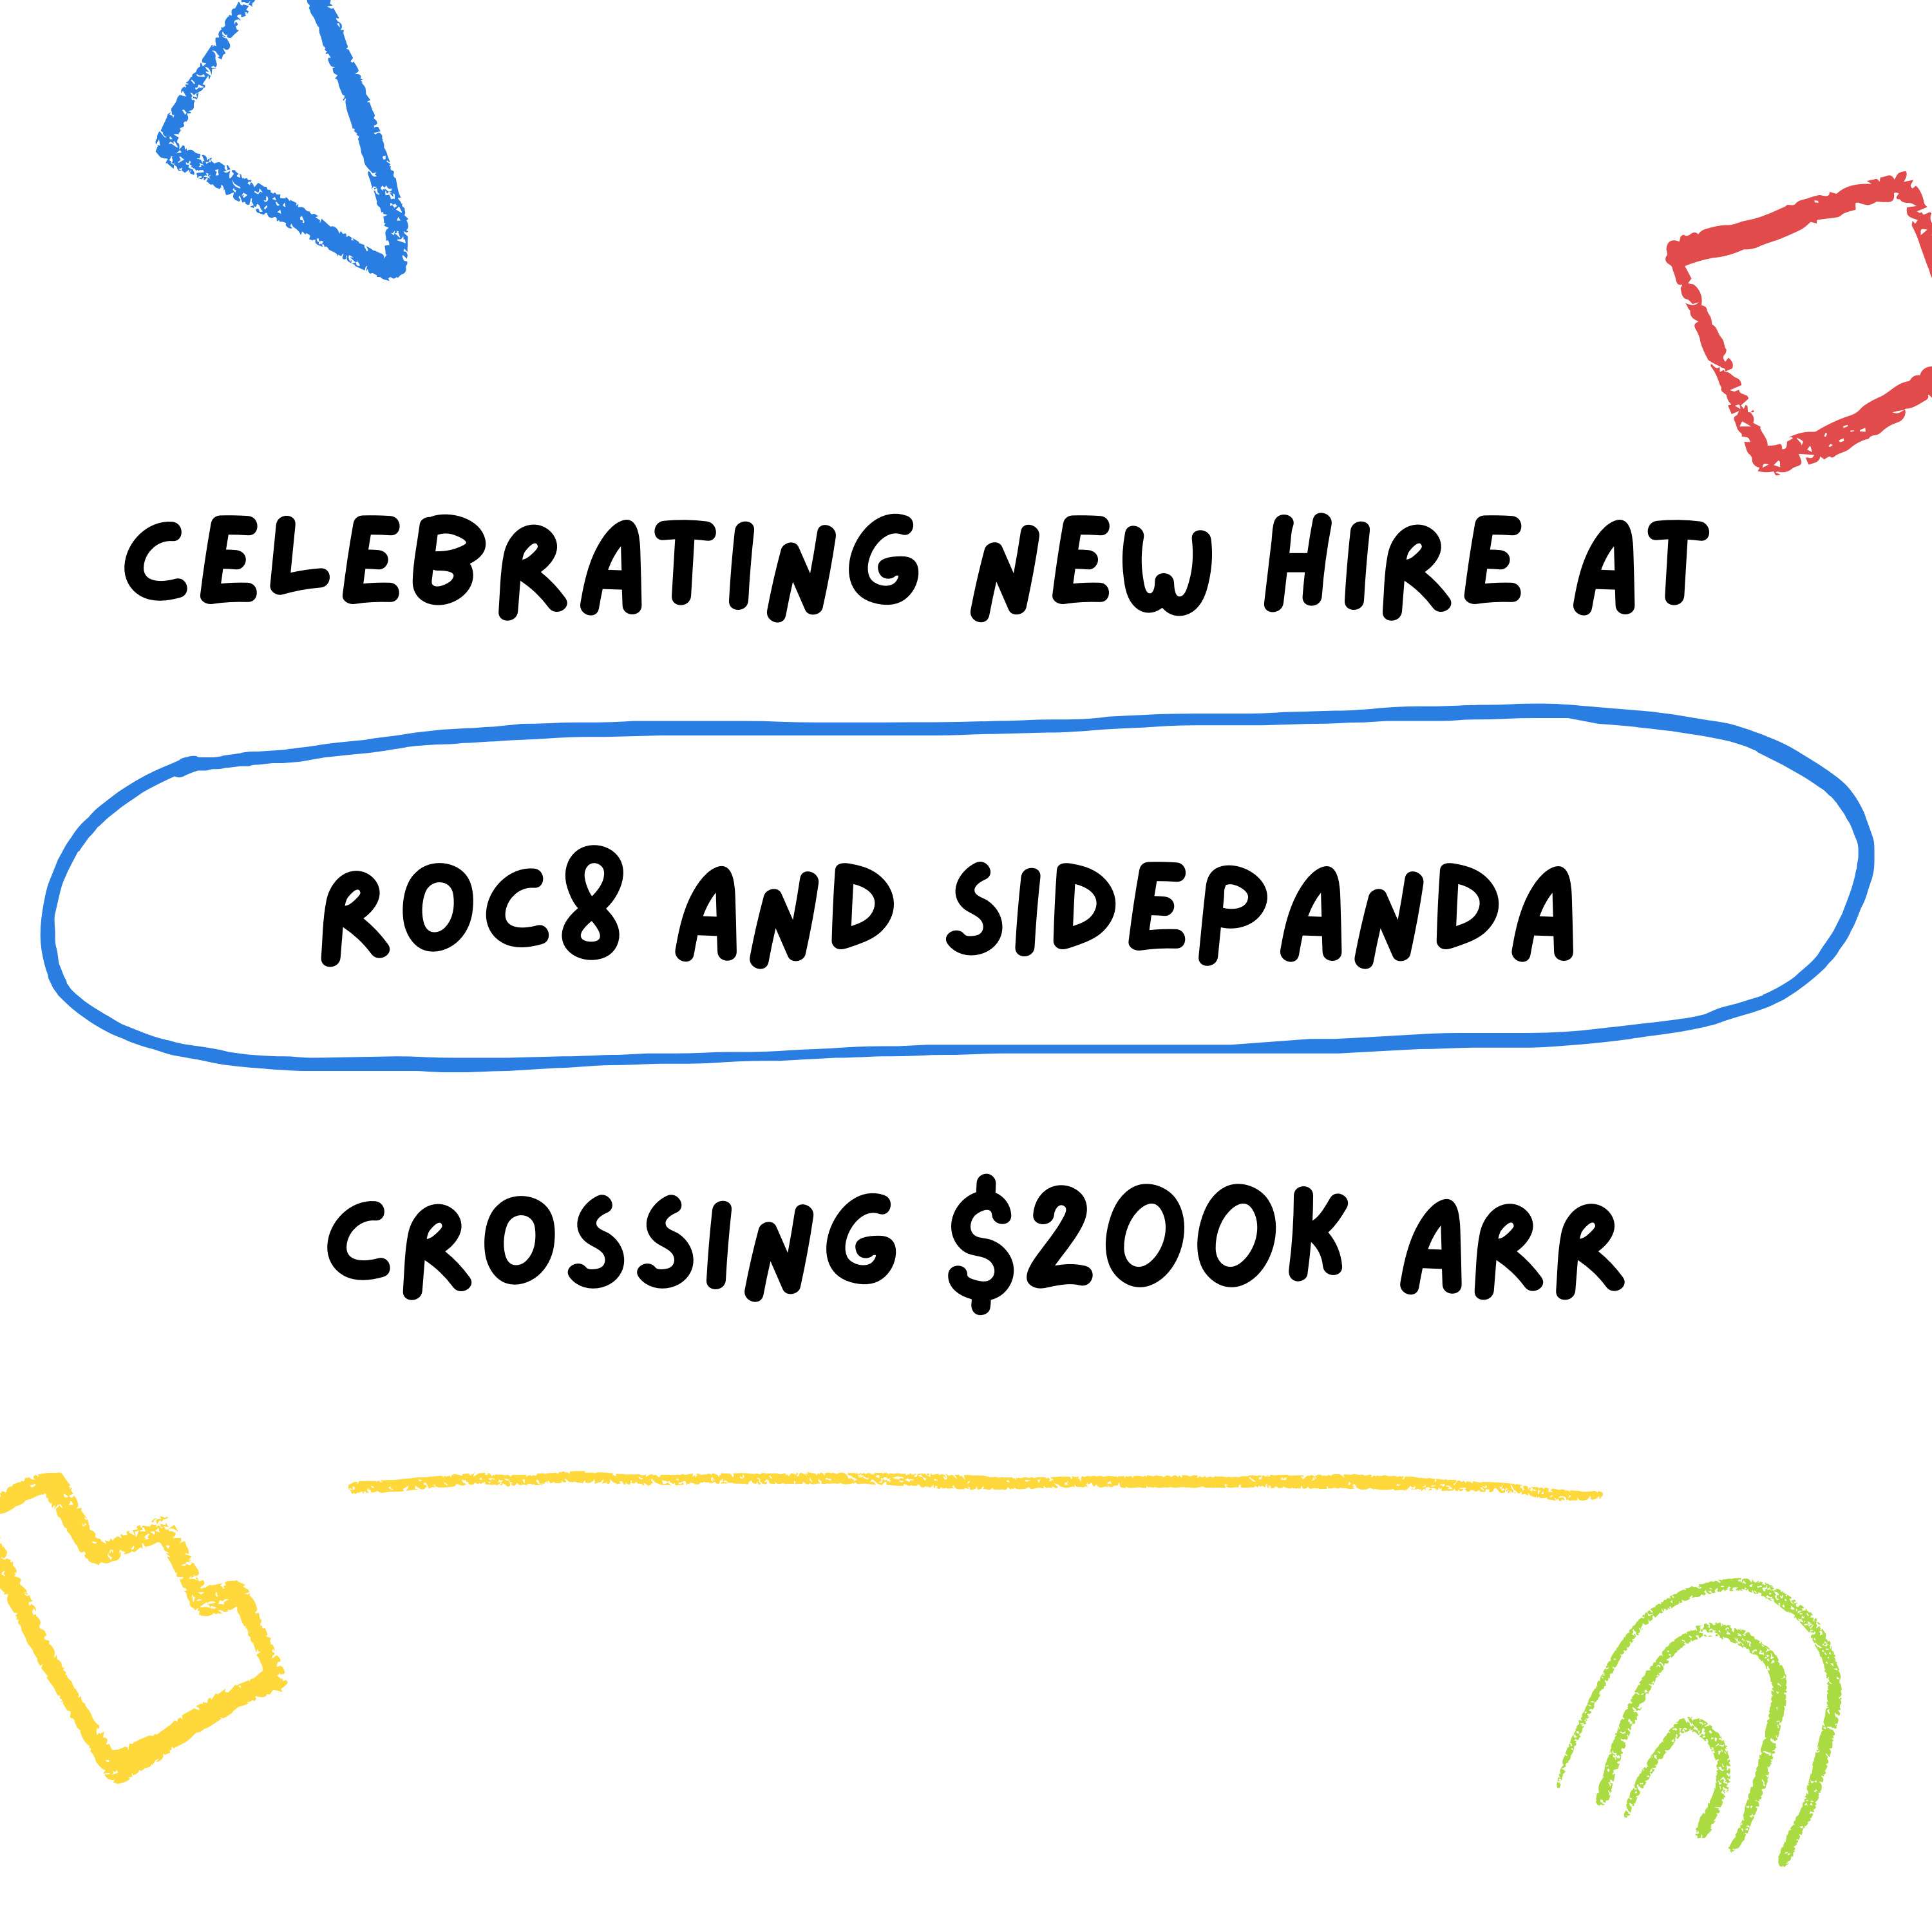 Celebrating New Hire at Roc8 and SidePanda Crossing $200K ARR